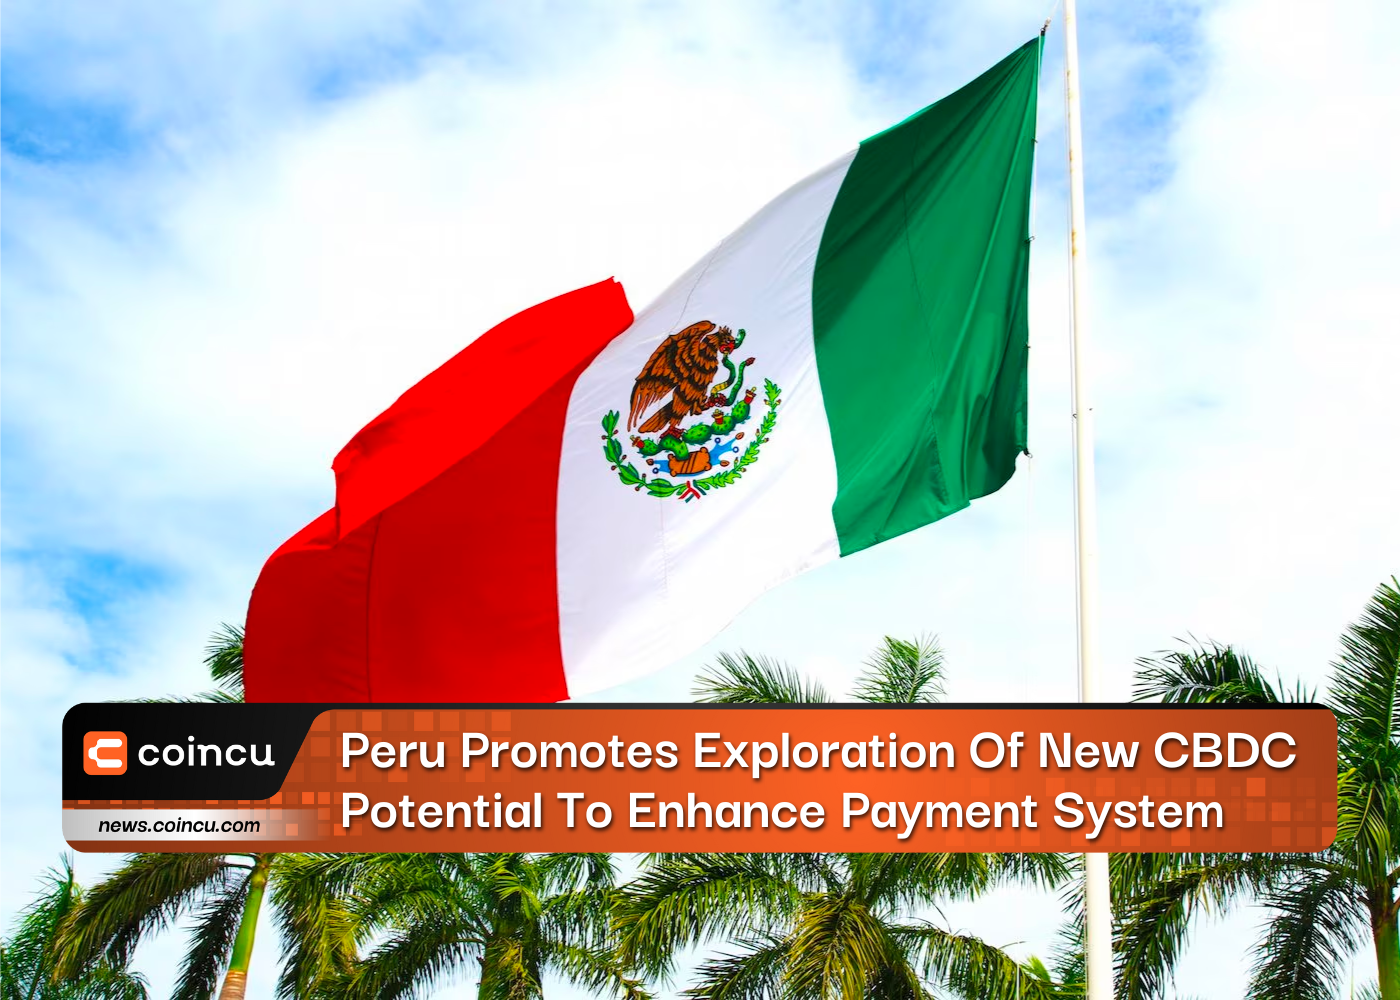 Peru Promotes Exploration Of New CBDC Potential To Enhance Payment System